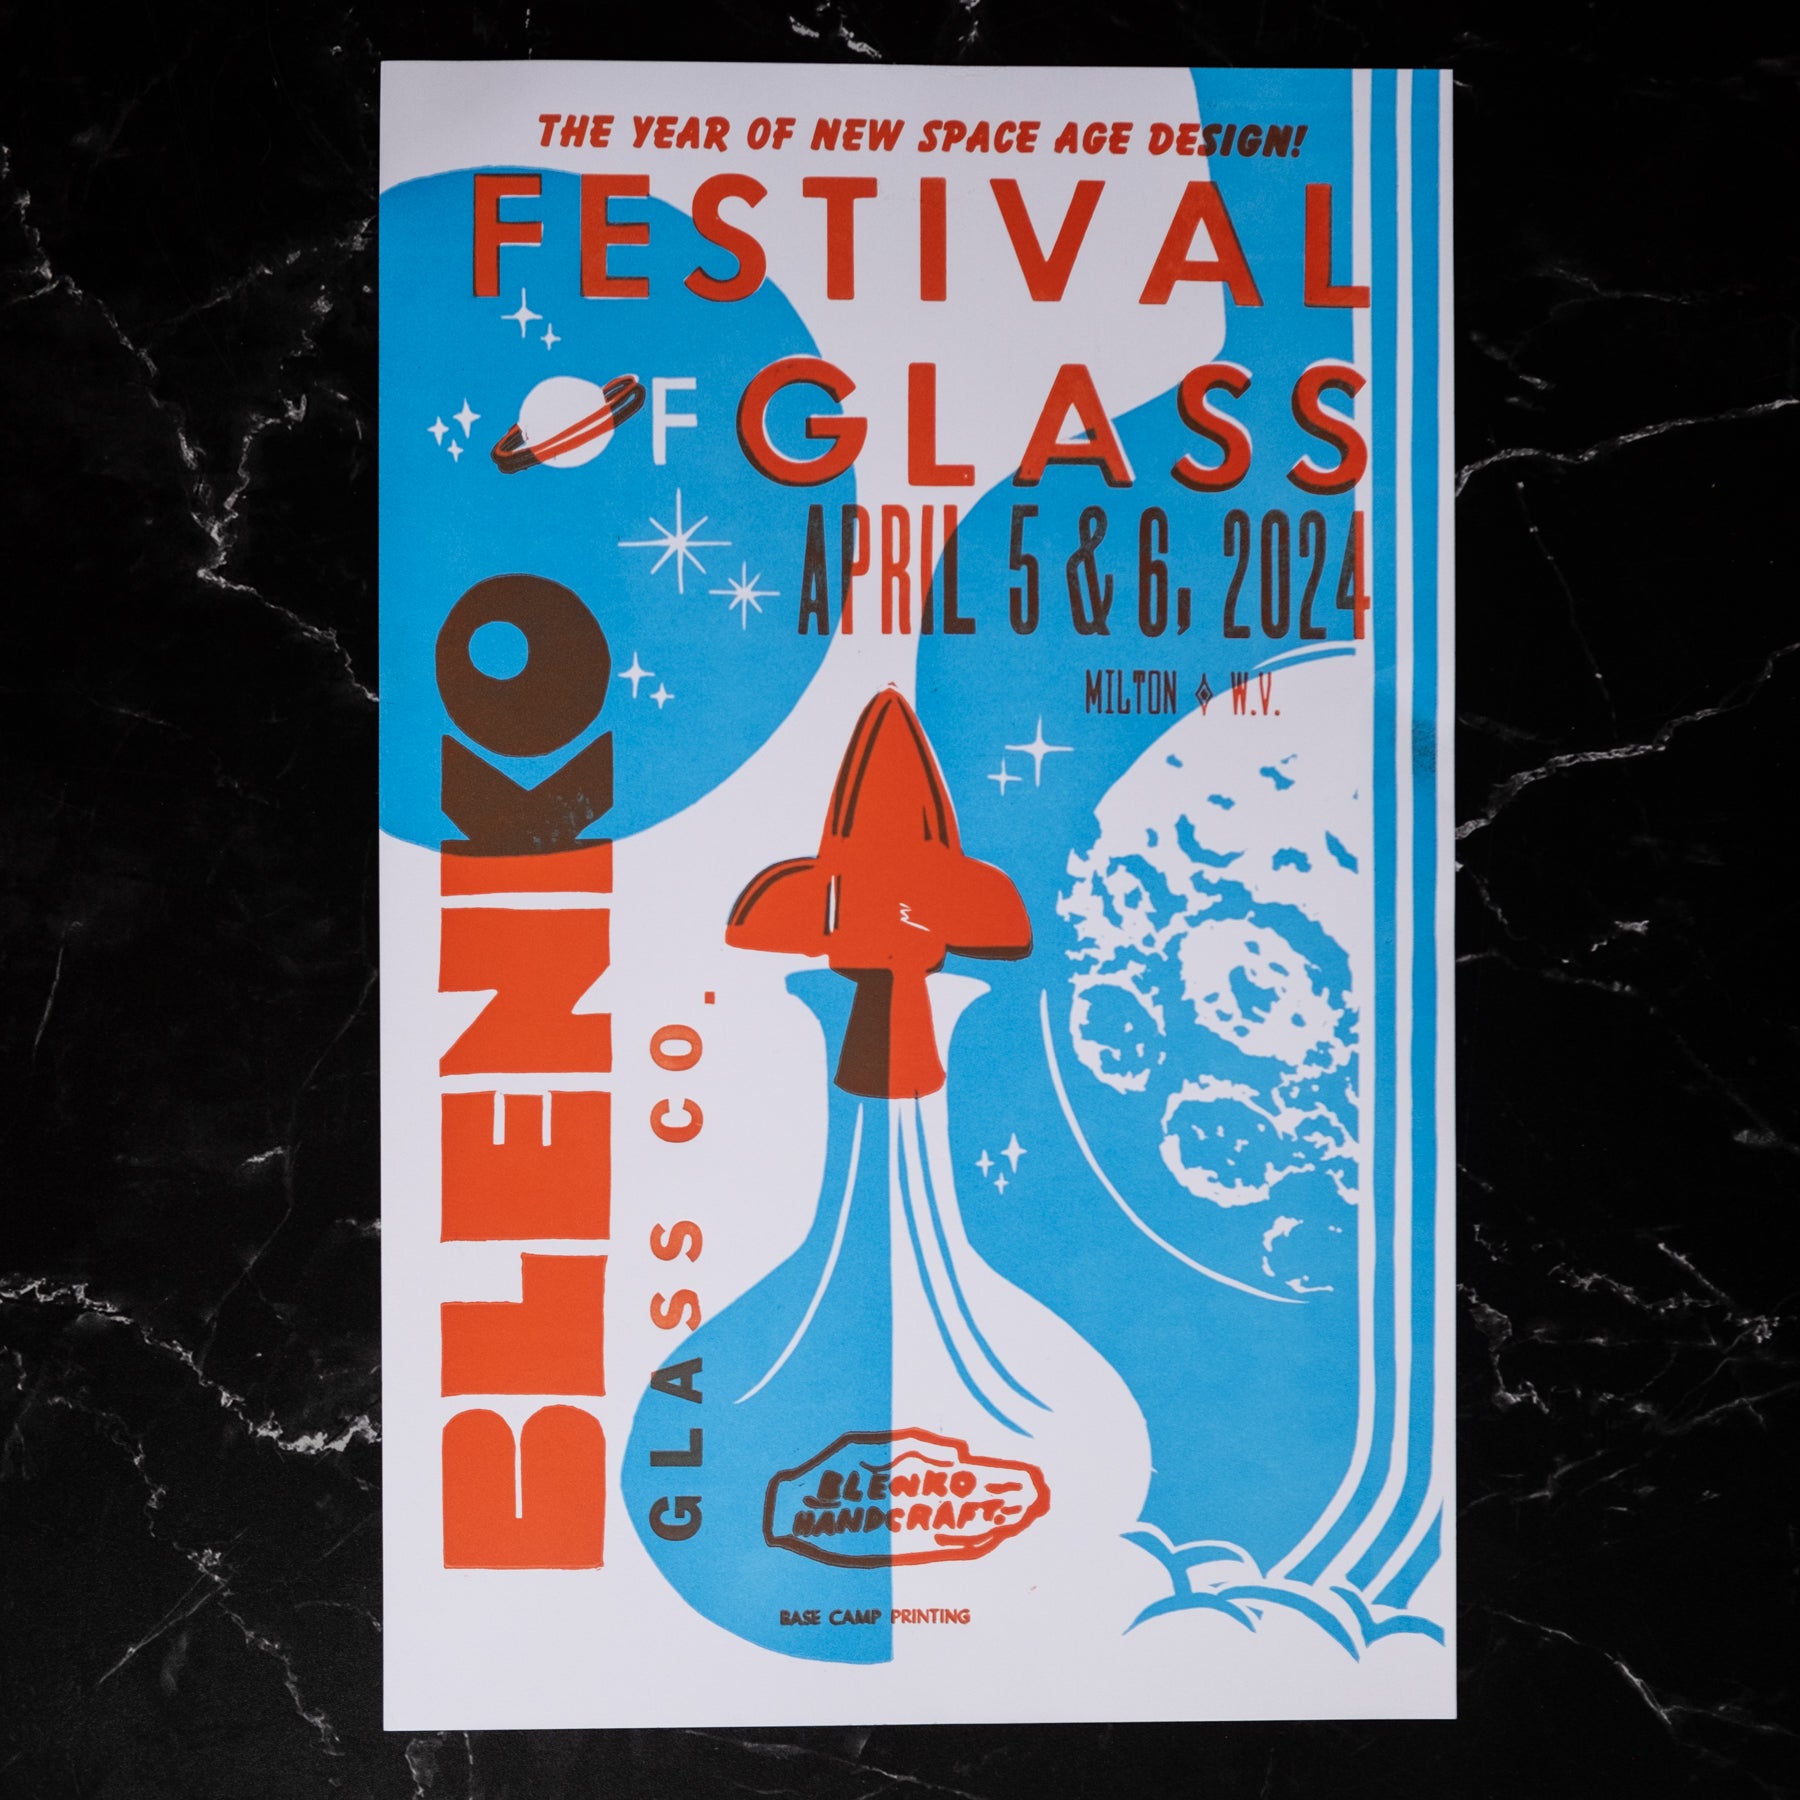 Festival of Glass Base Camp Poster